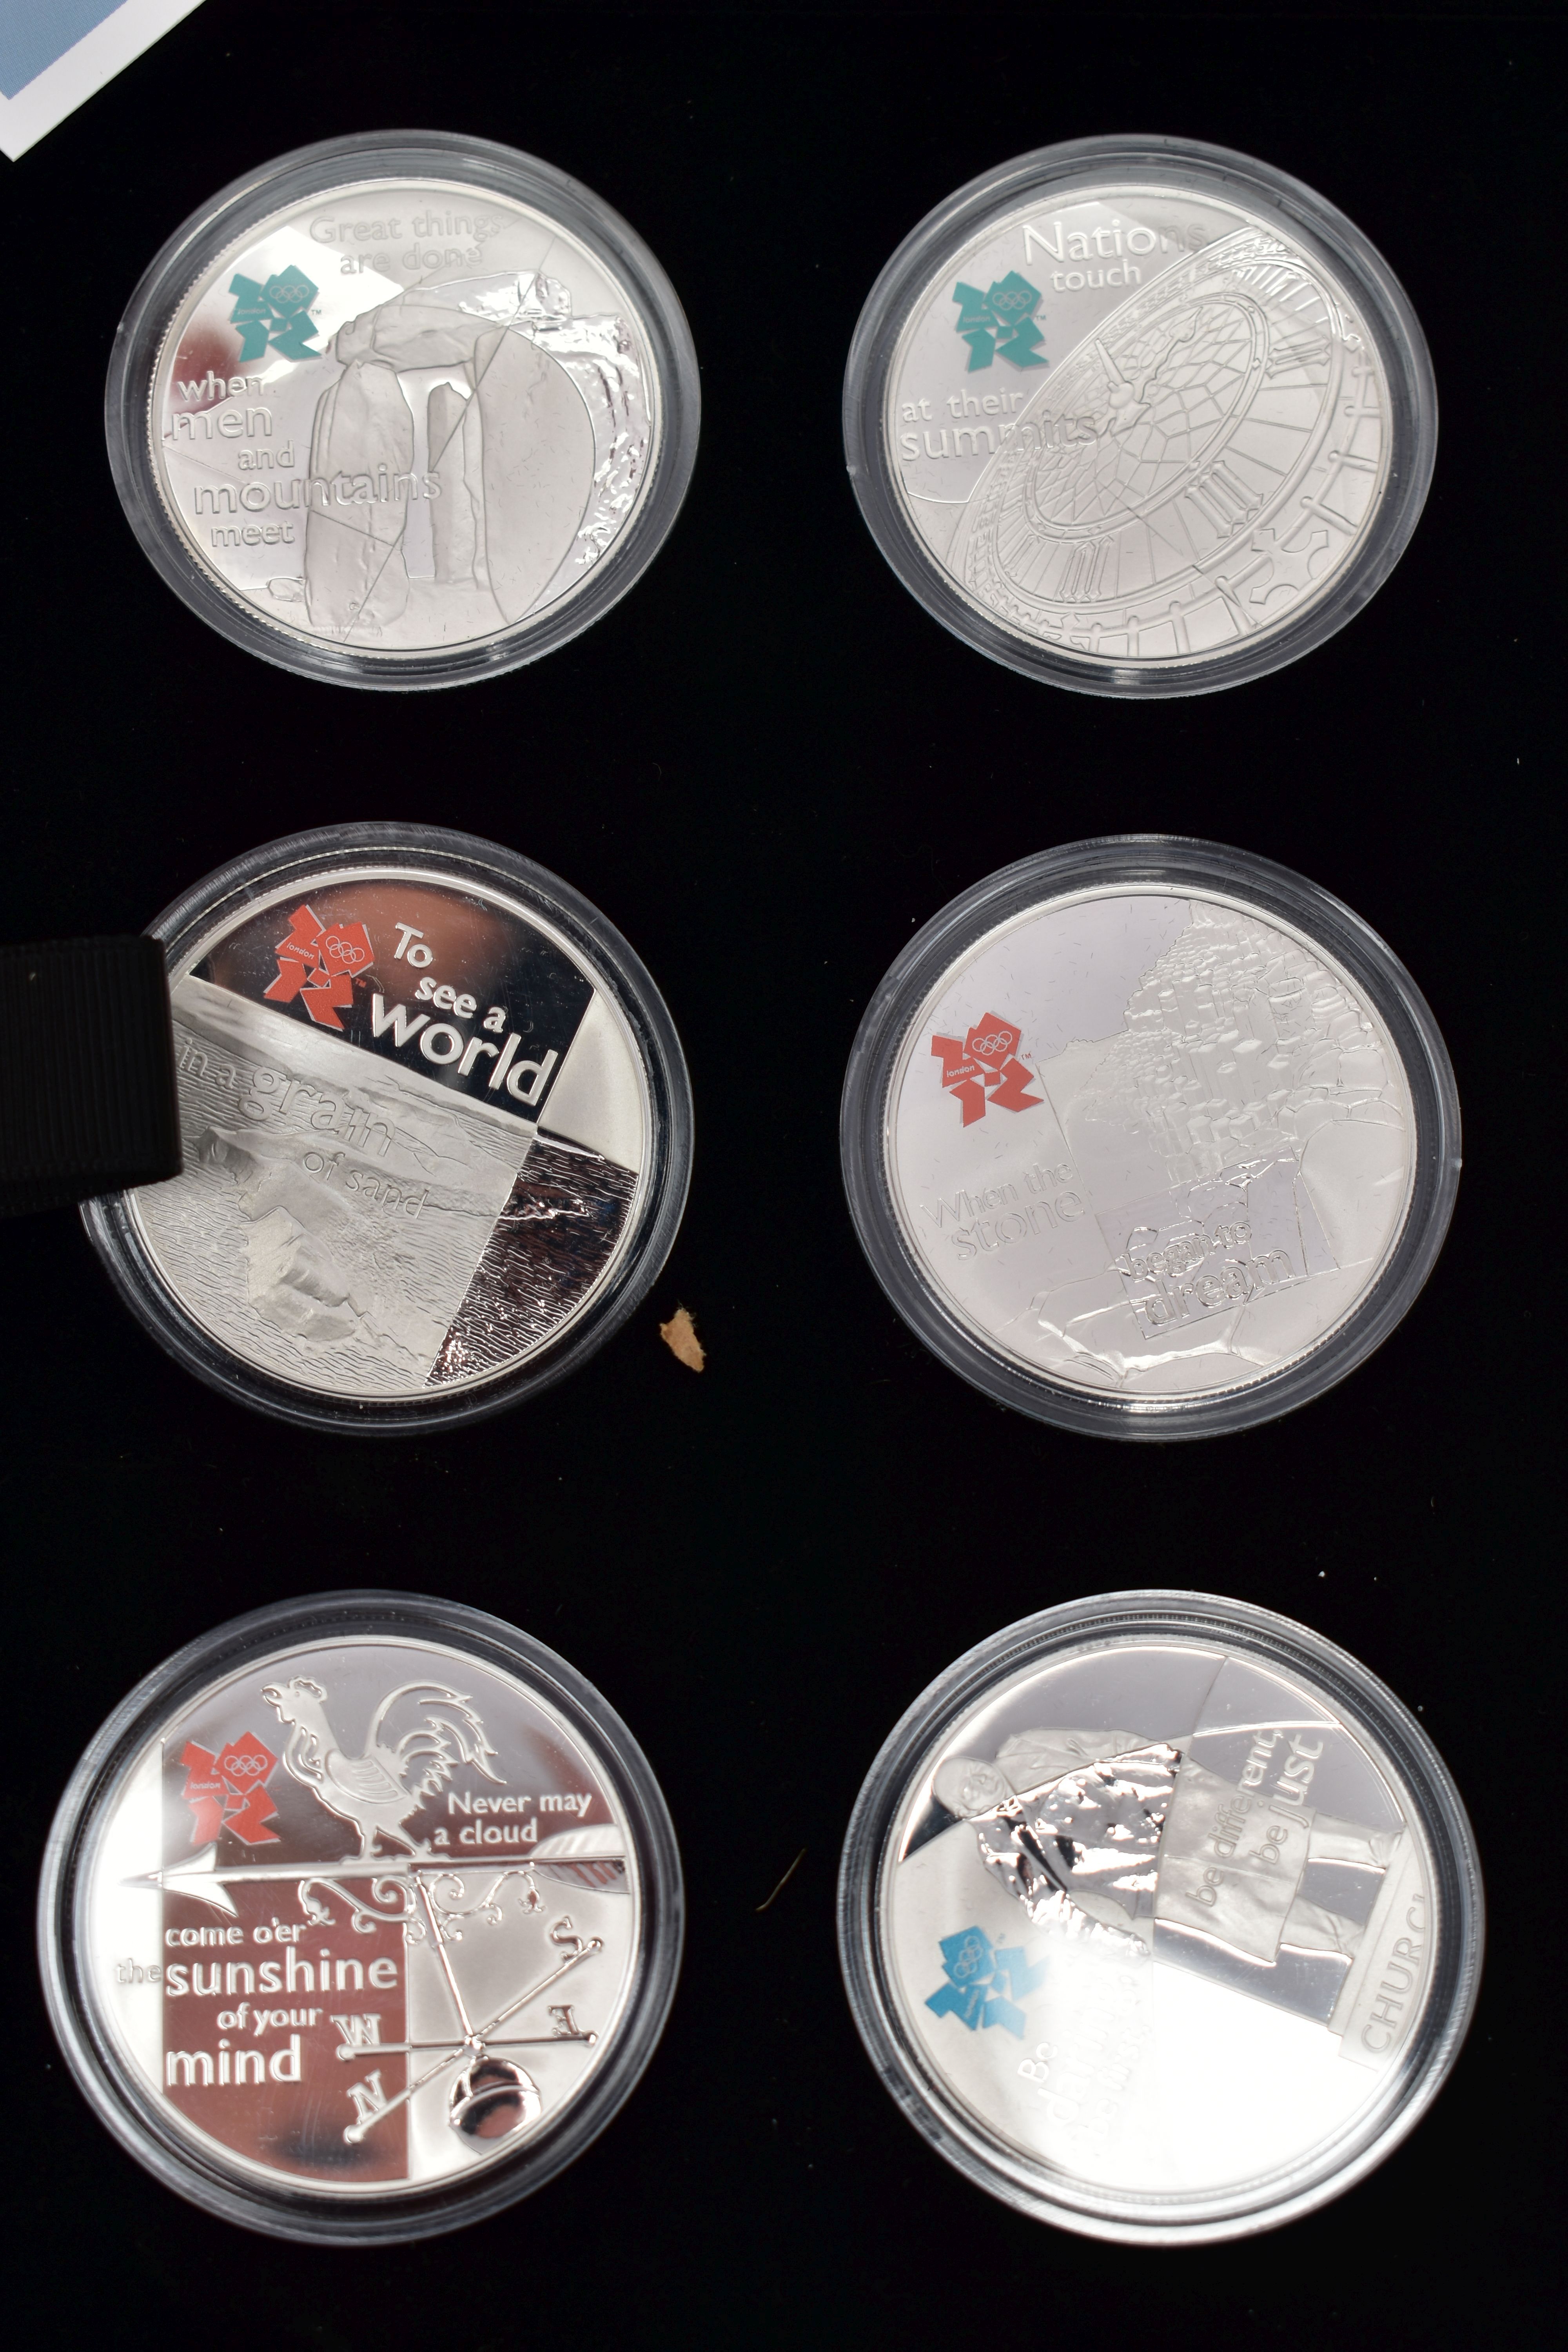 A CASED DISPLAY BY THE ROYAL MINT (A Celebration of Britain) 18 Silver proof series coins for the - Image 3 of 9